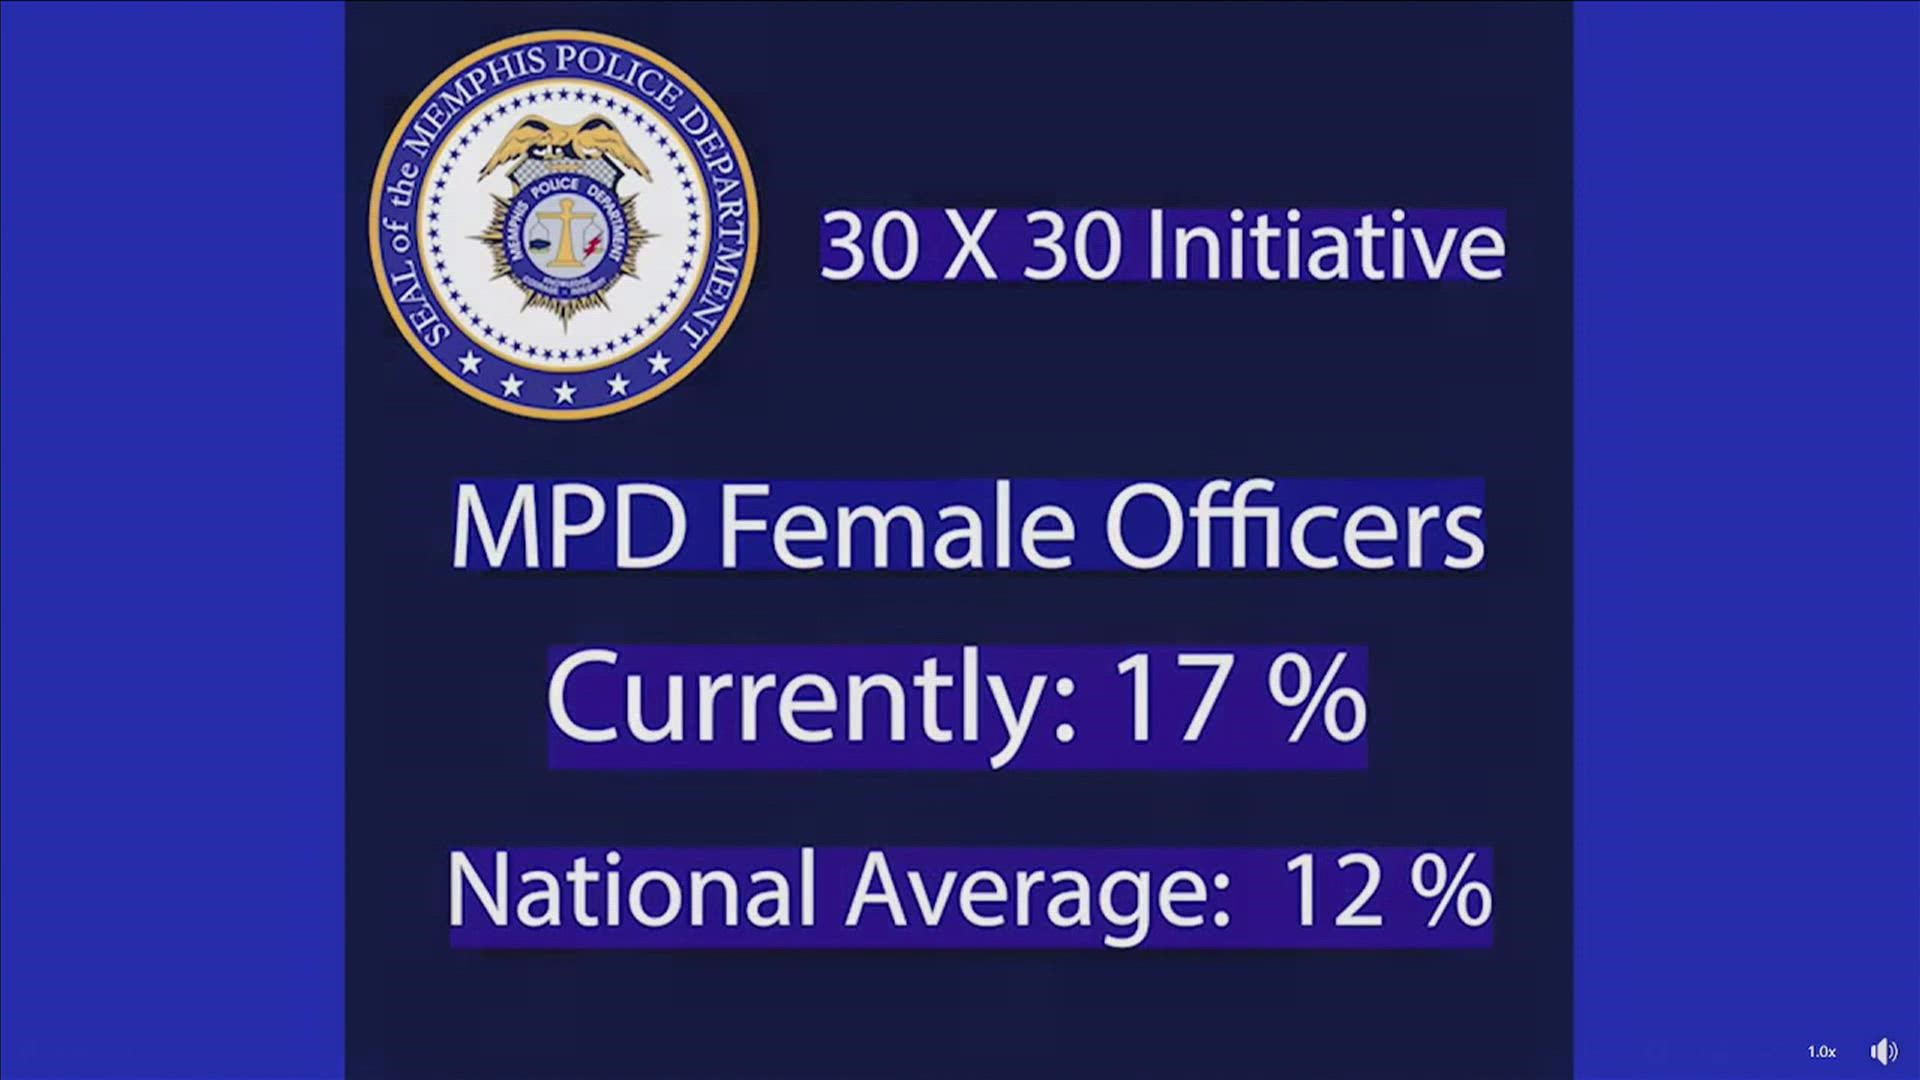 We spoke with MPD Police Chief CJ Davis about the 30 X 30 push to get more women to join the department.